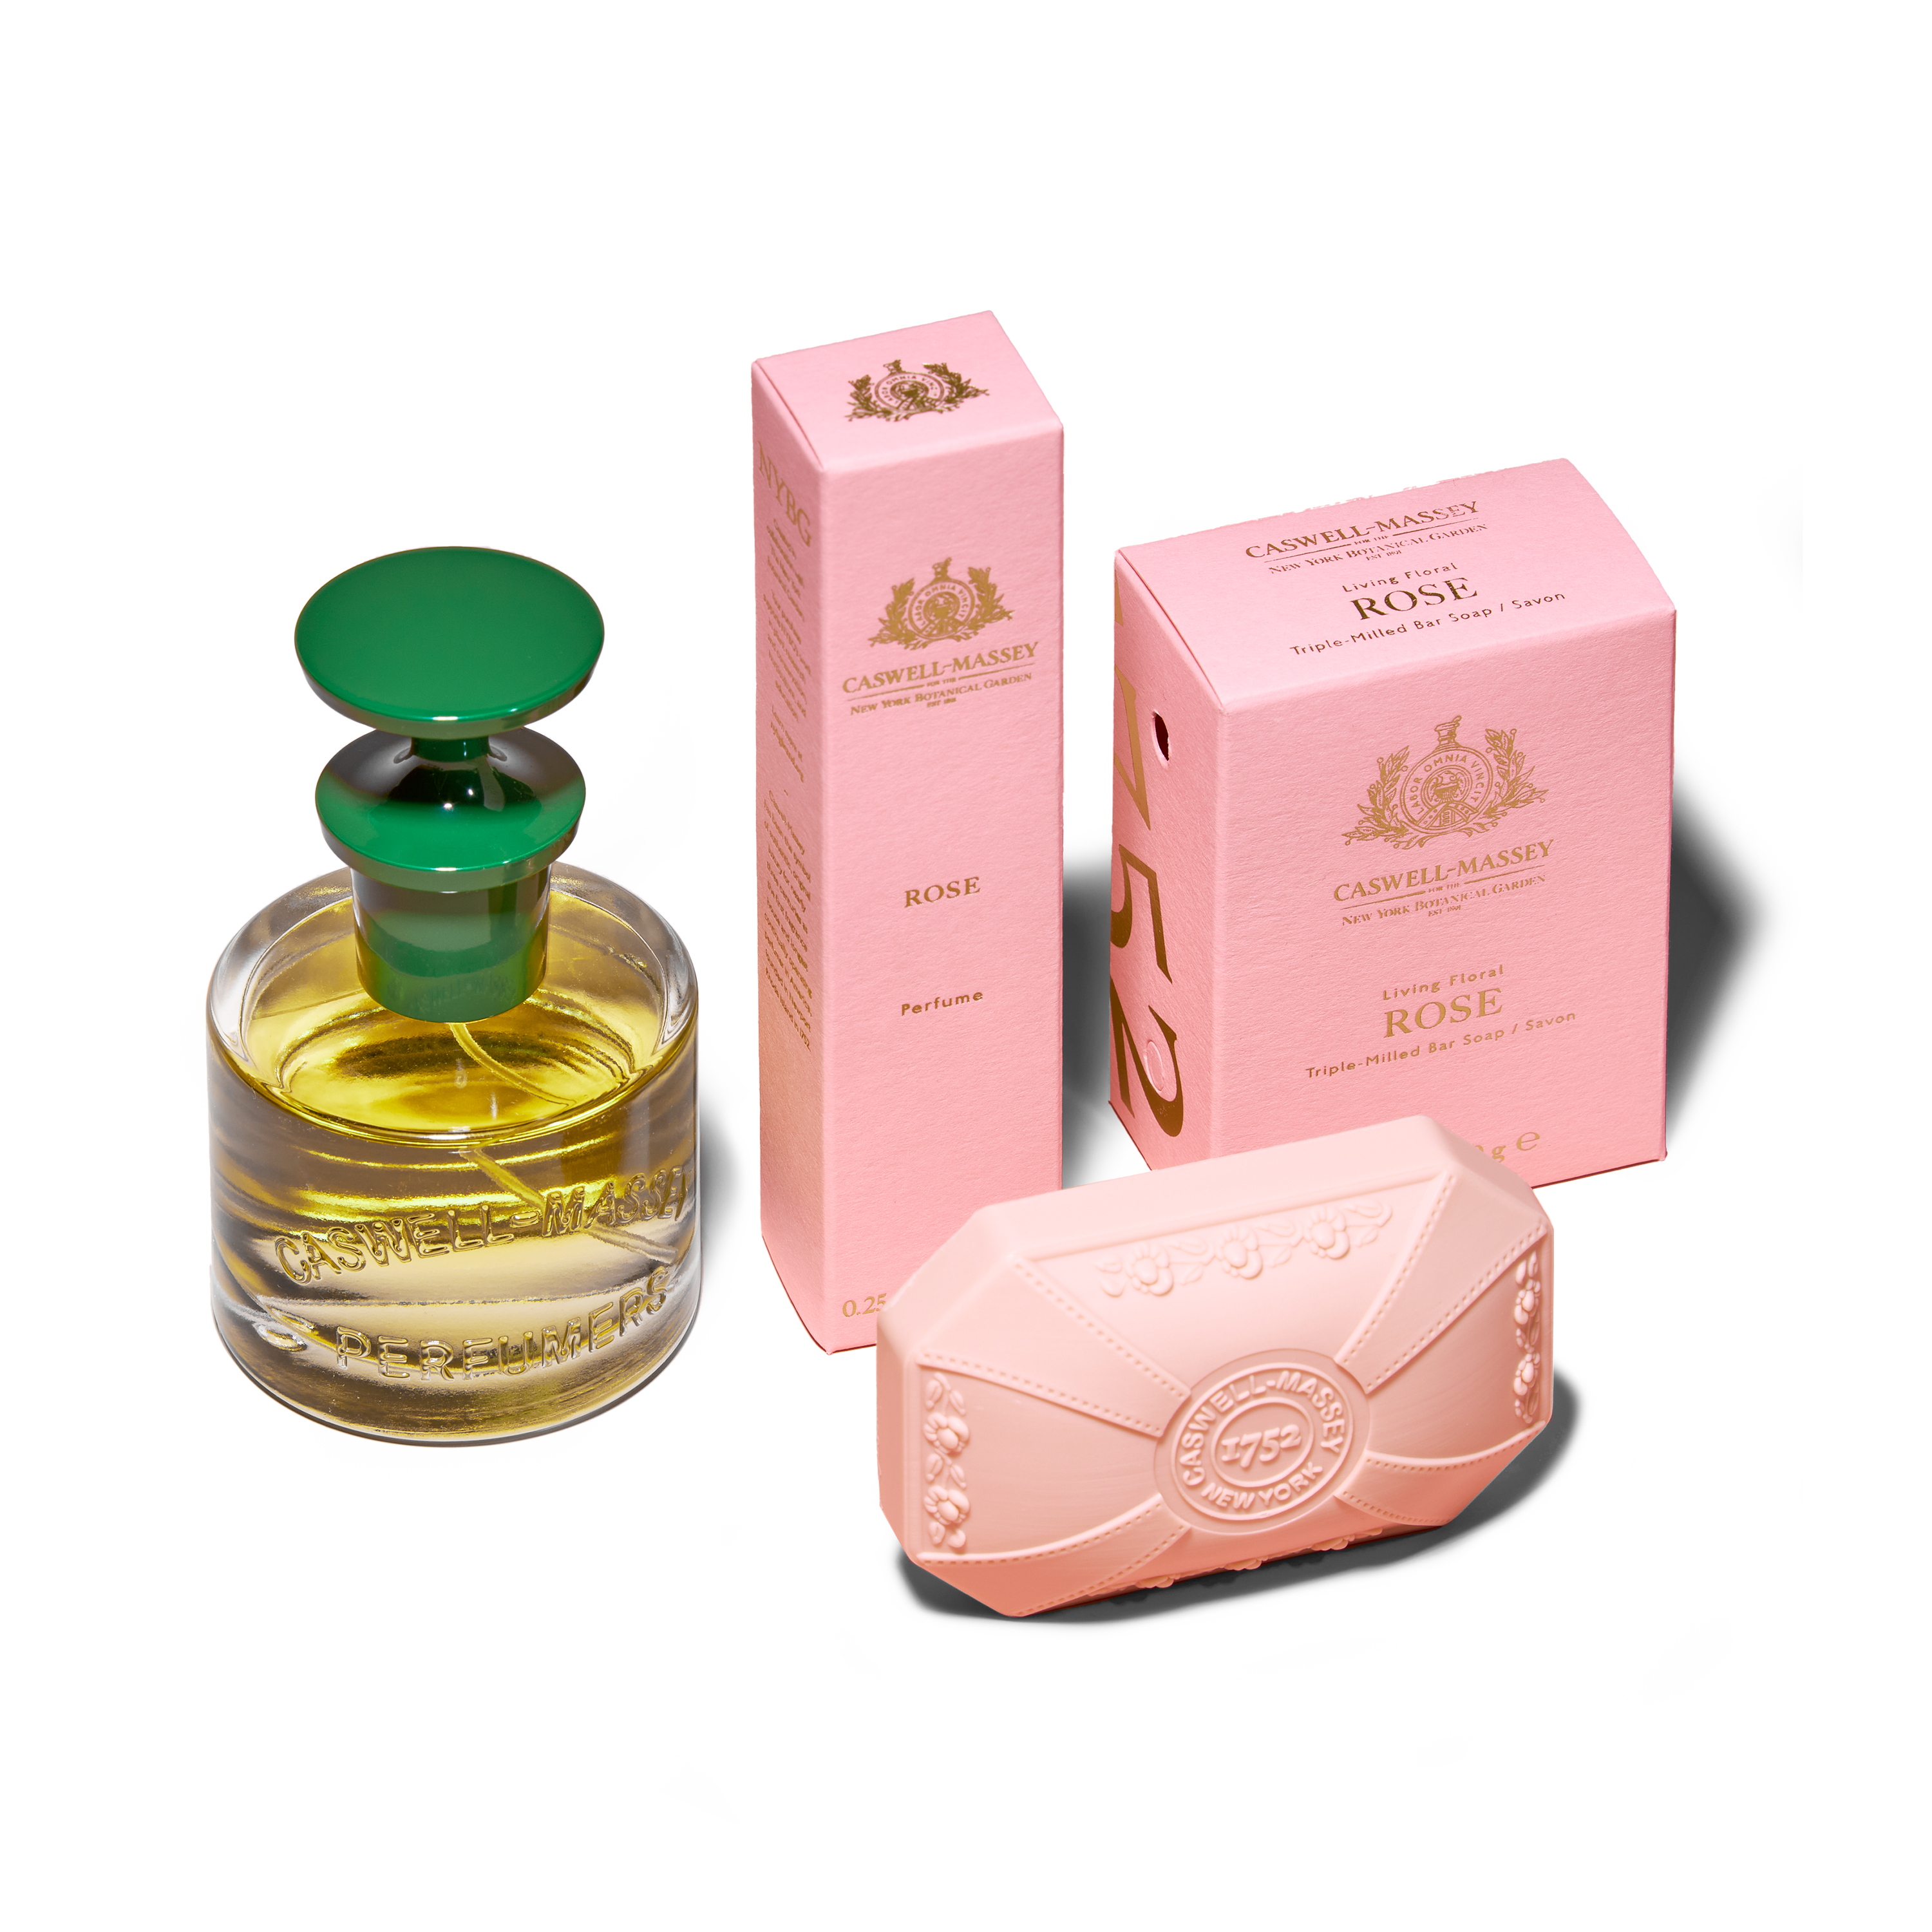 Caswell-Massey Rose Perfume for Women shown as full-size 60ml, travel-size 7.5ml, and Rose Bath Soap